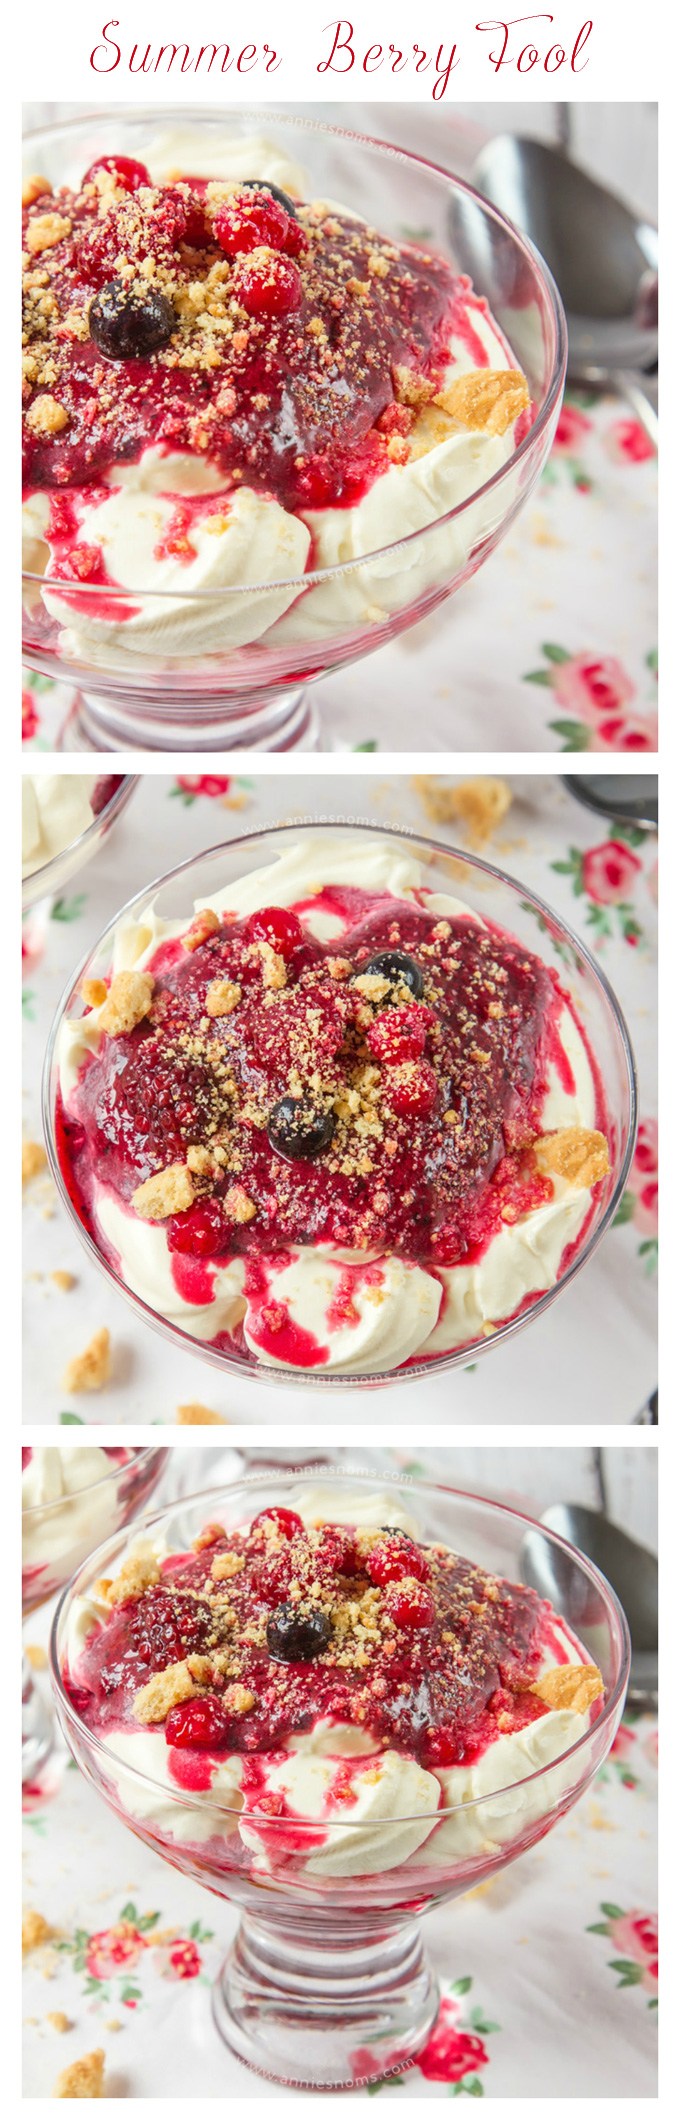 A quick and easy, no-bake dessert made with sweetened whipped cream, a mix of luscious Summer berries and biscuit crumbs. Perfect to make-ahead of time, everyone will fall in love with these creamy, refreshing pots of heaven!